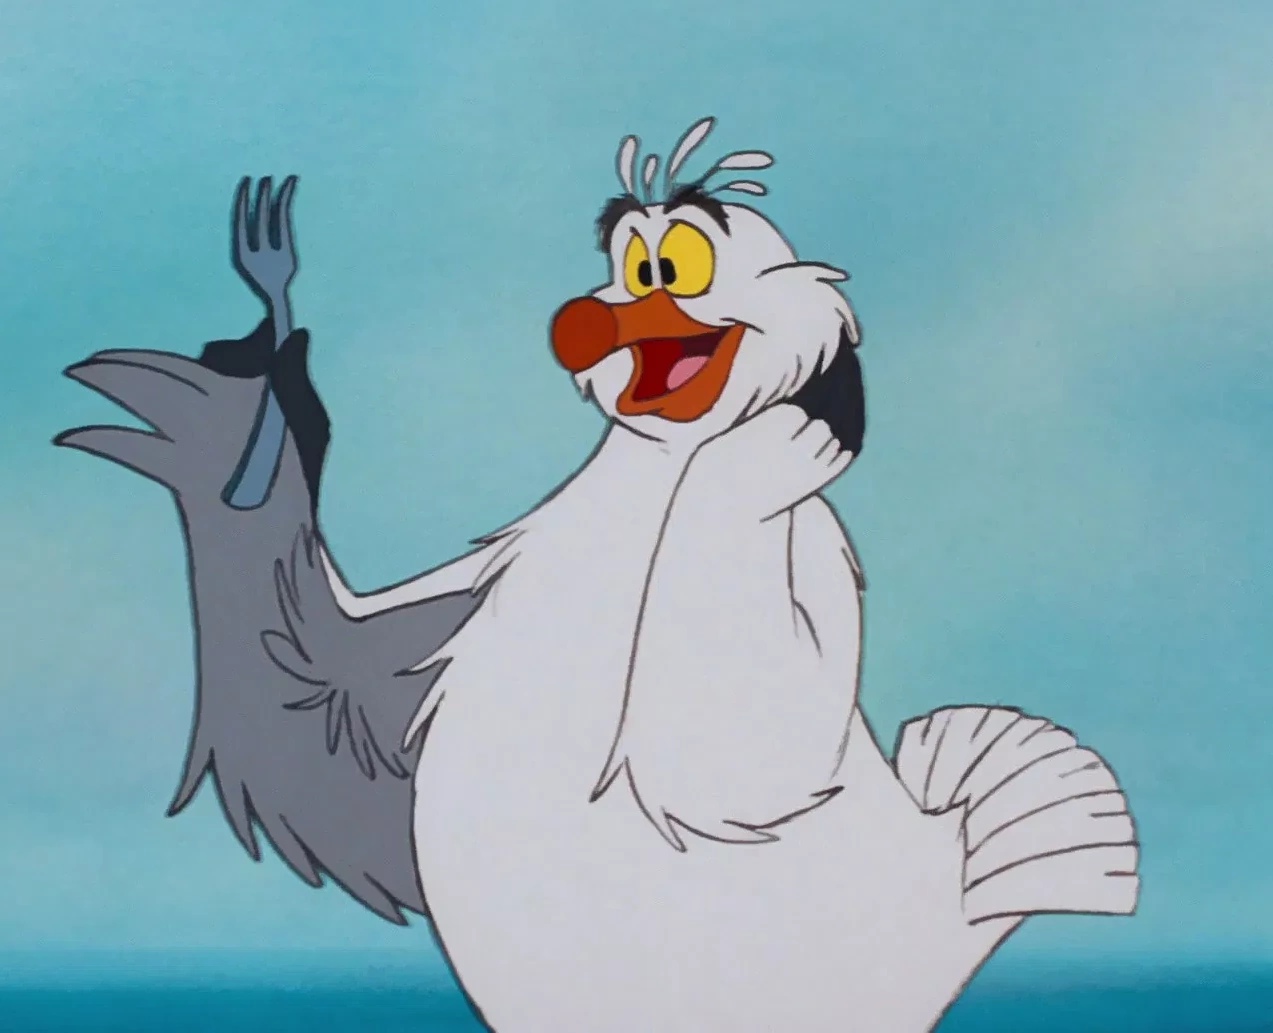 What is Scuttle like in The Little Mermaid?